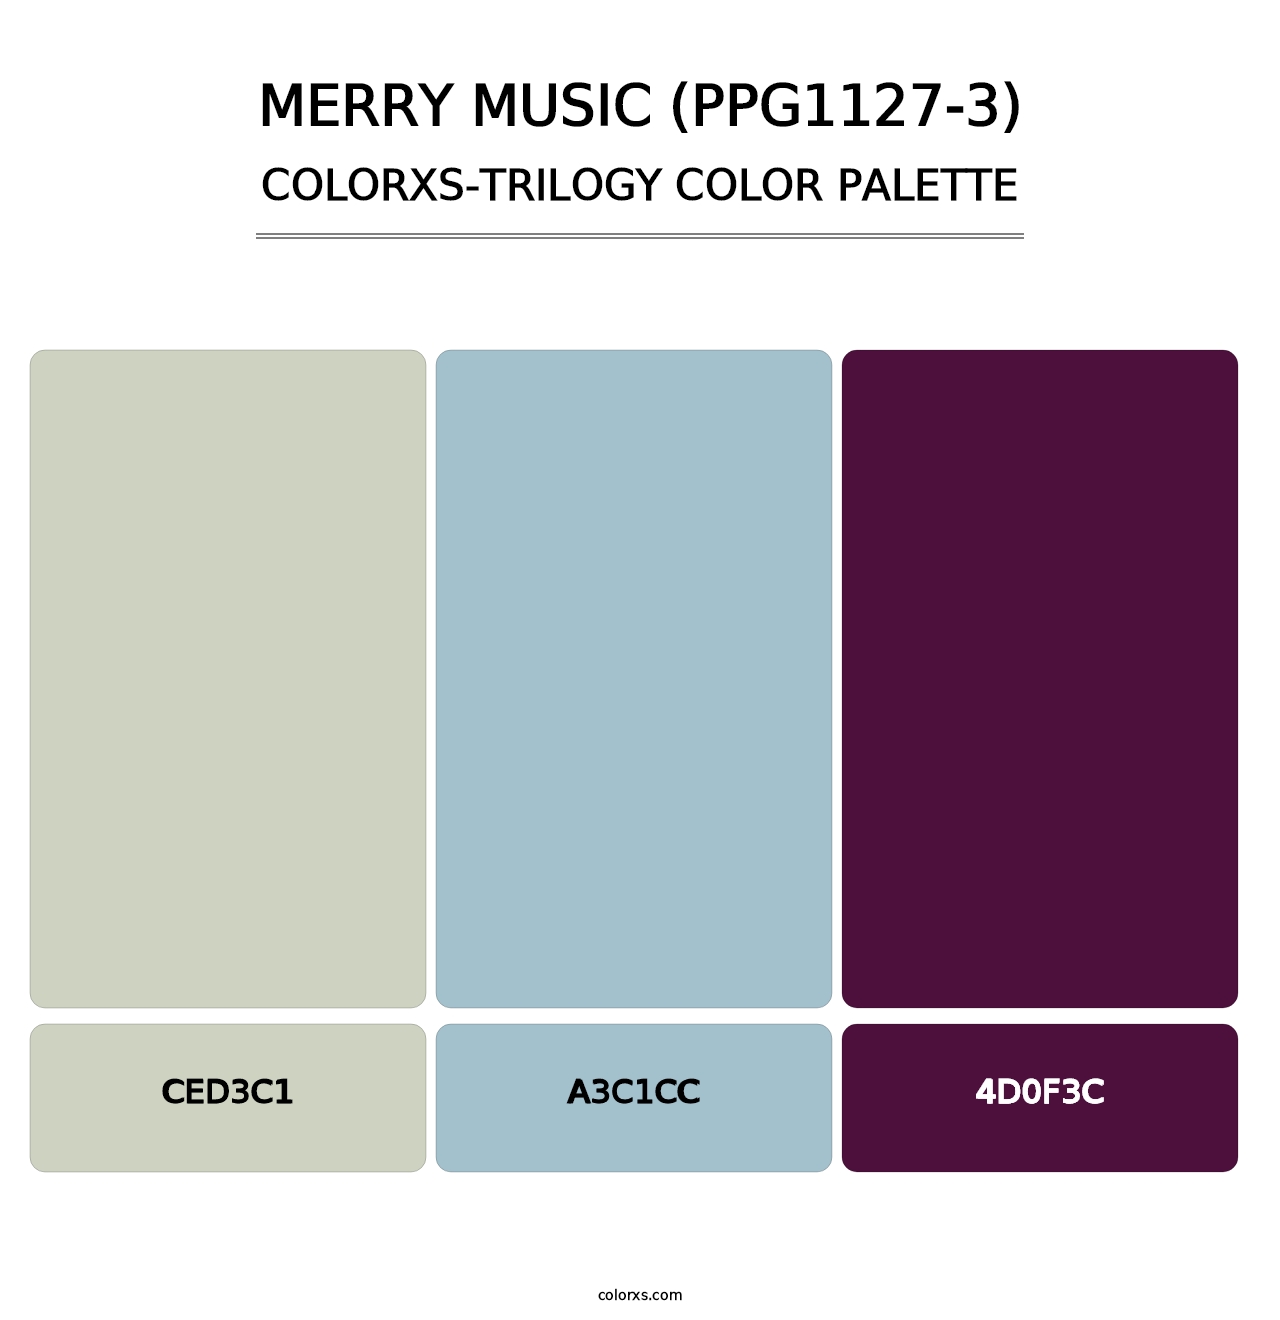 Merry Music (PPG1127-3) - Colorxs Trilogy Palette